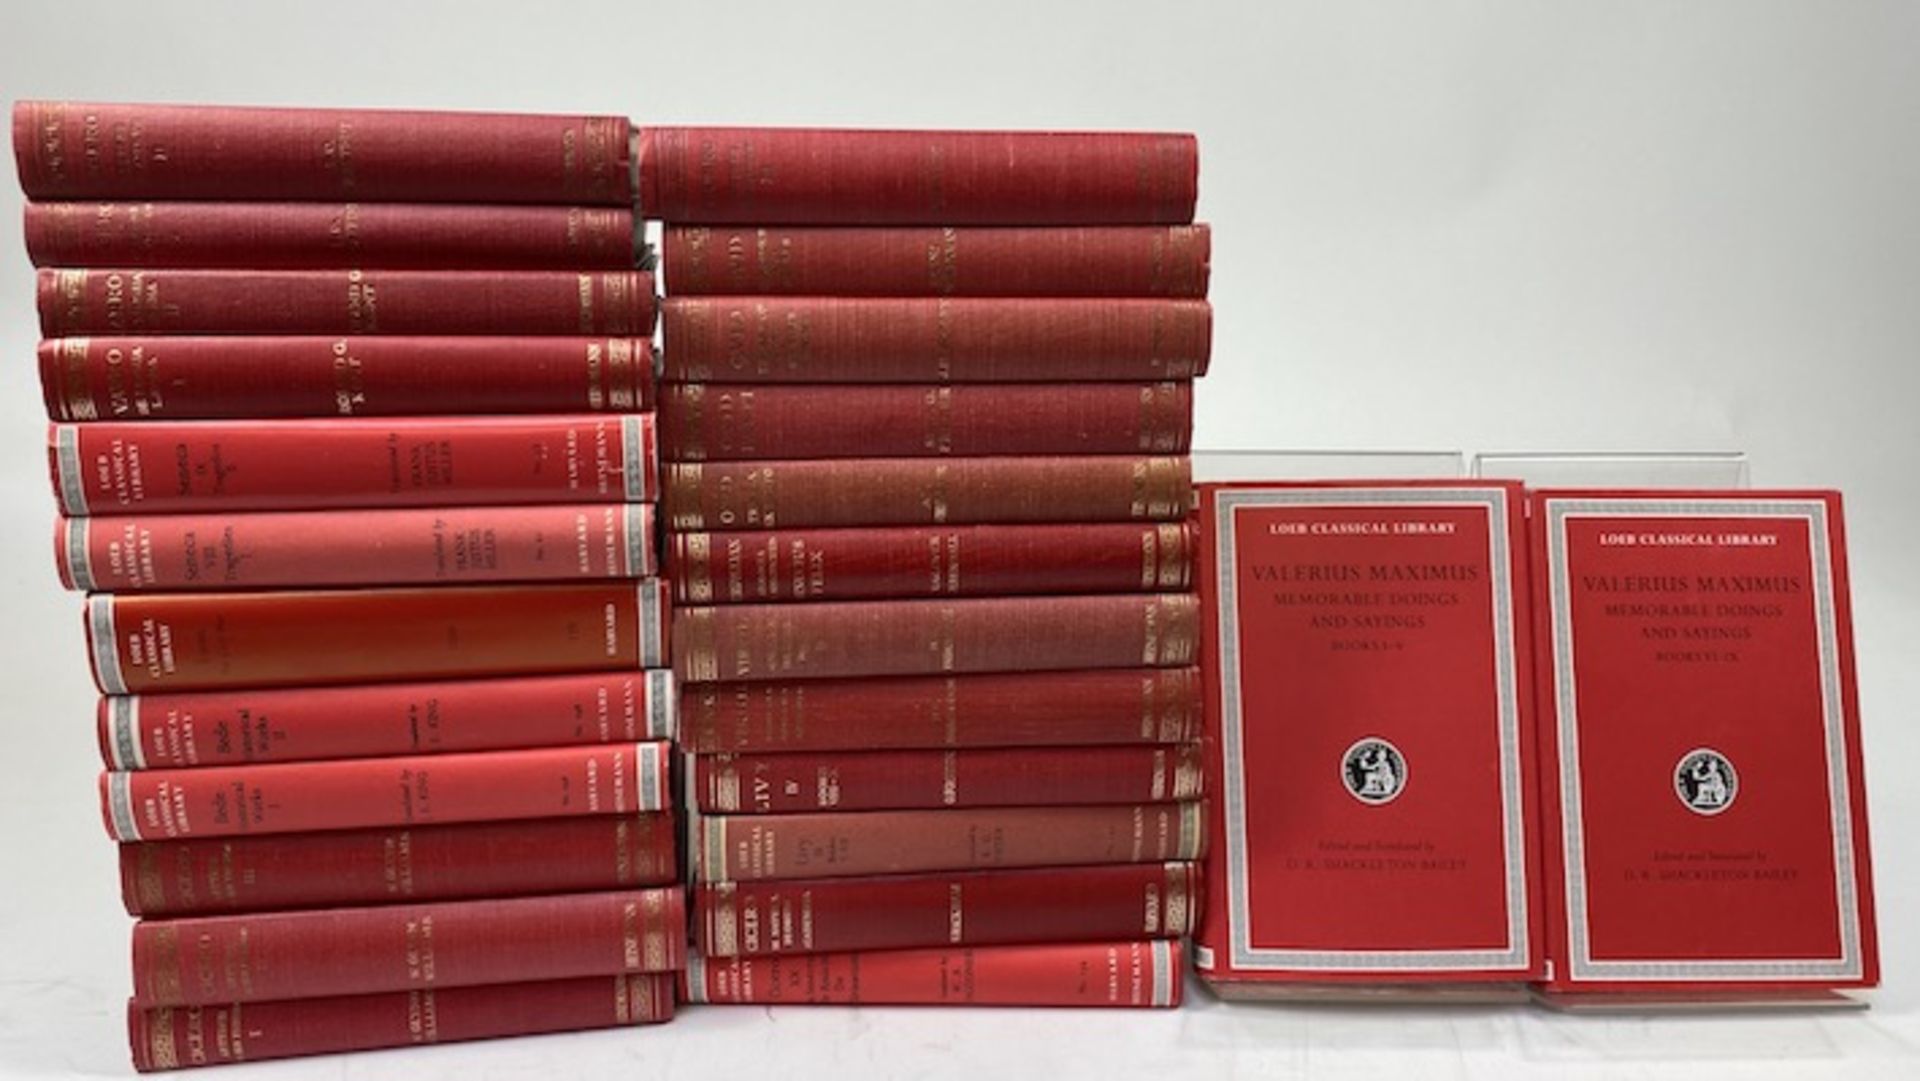 LOEB CLASSICAL LIBRARY. Latin authors. 26 vols. of the series. Ocl. (9) w. dust-j. I.a.: VALERIUS